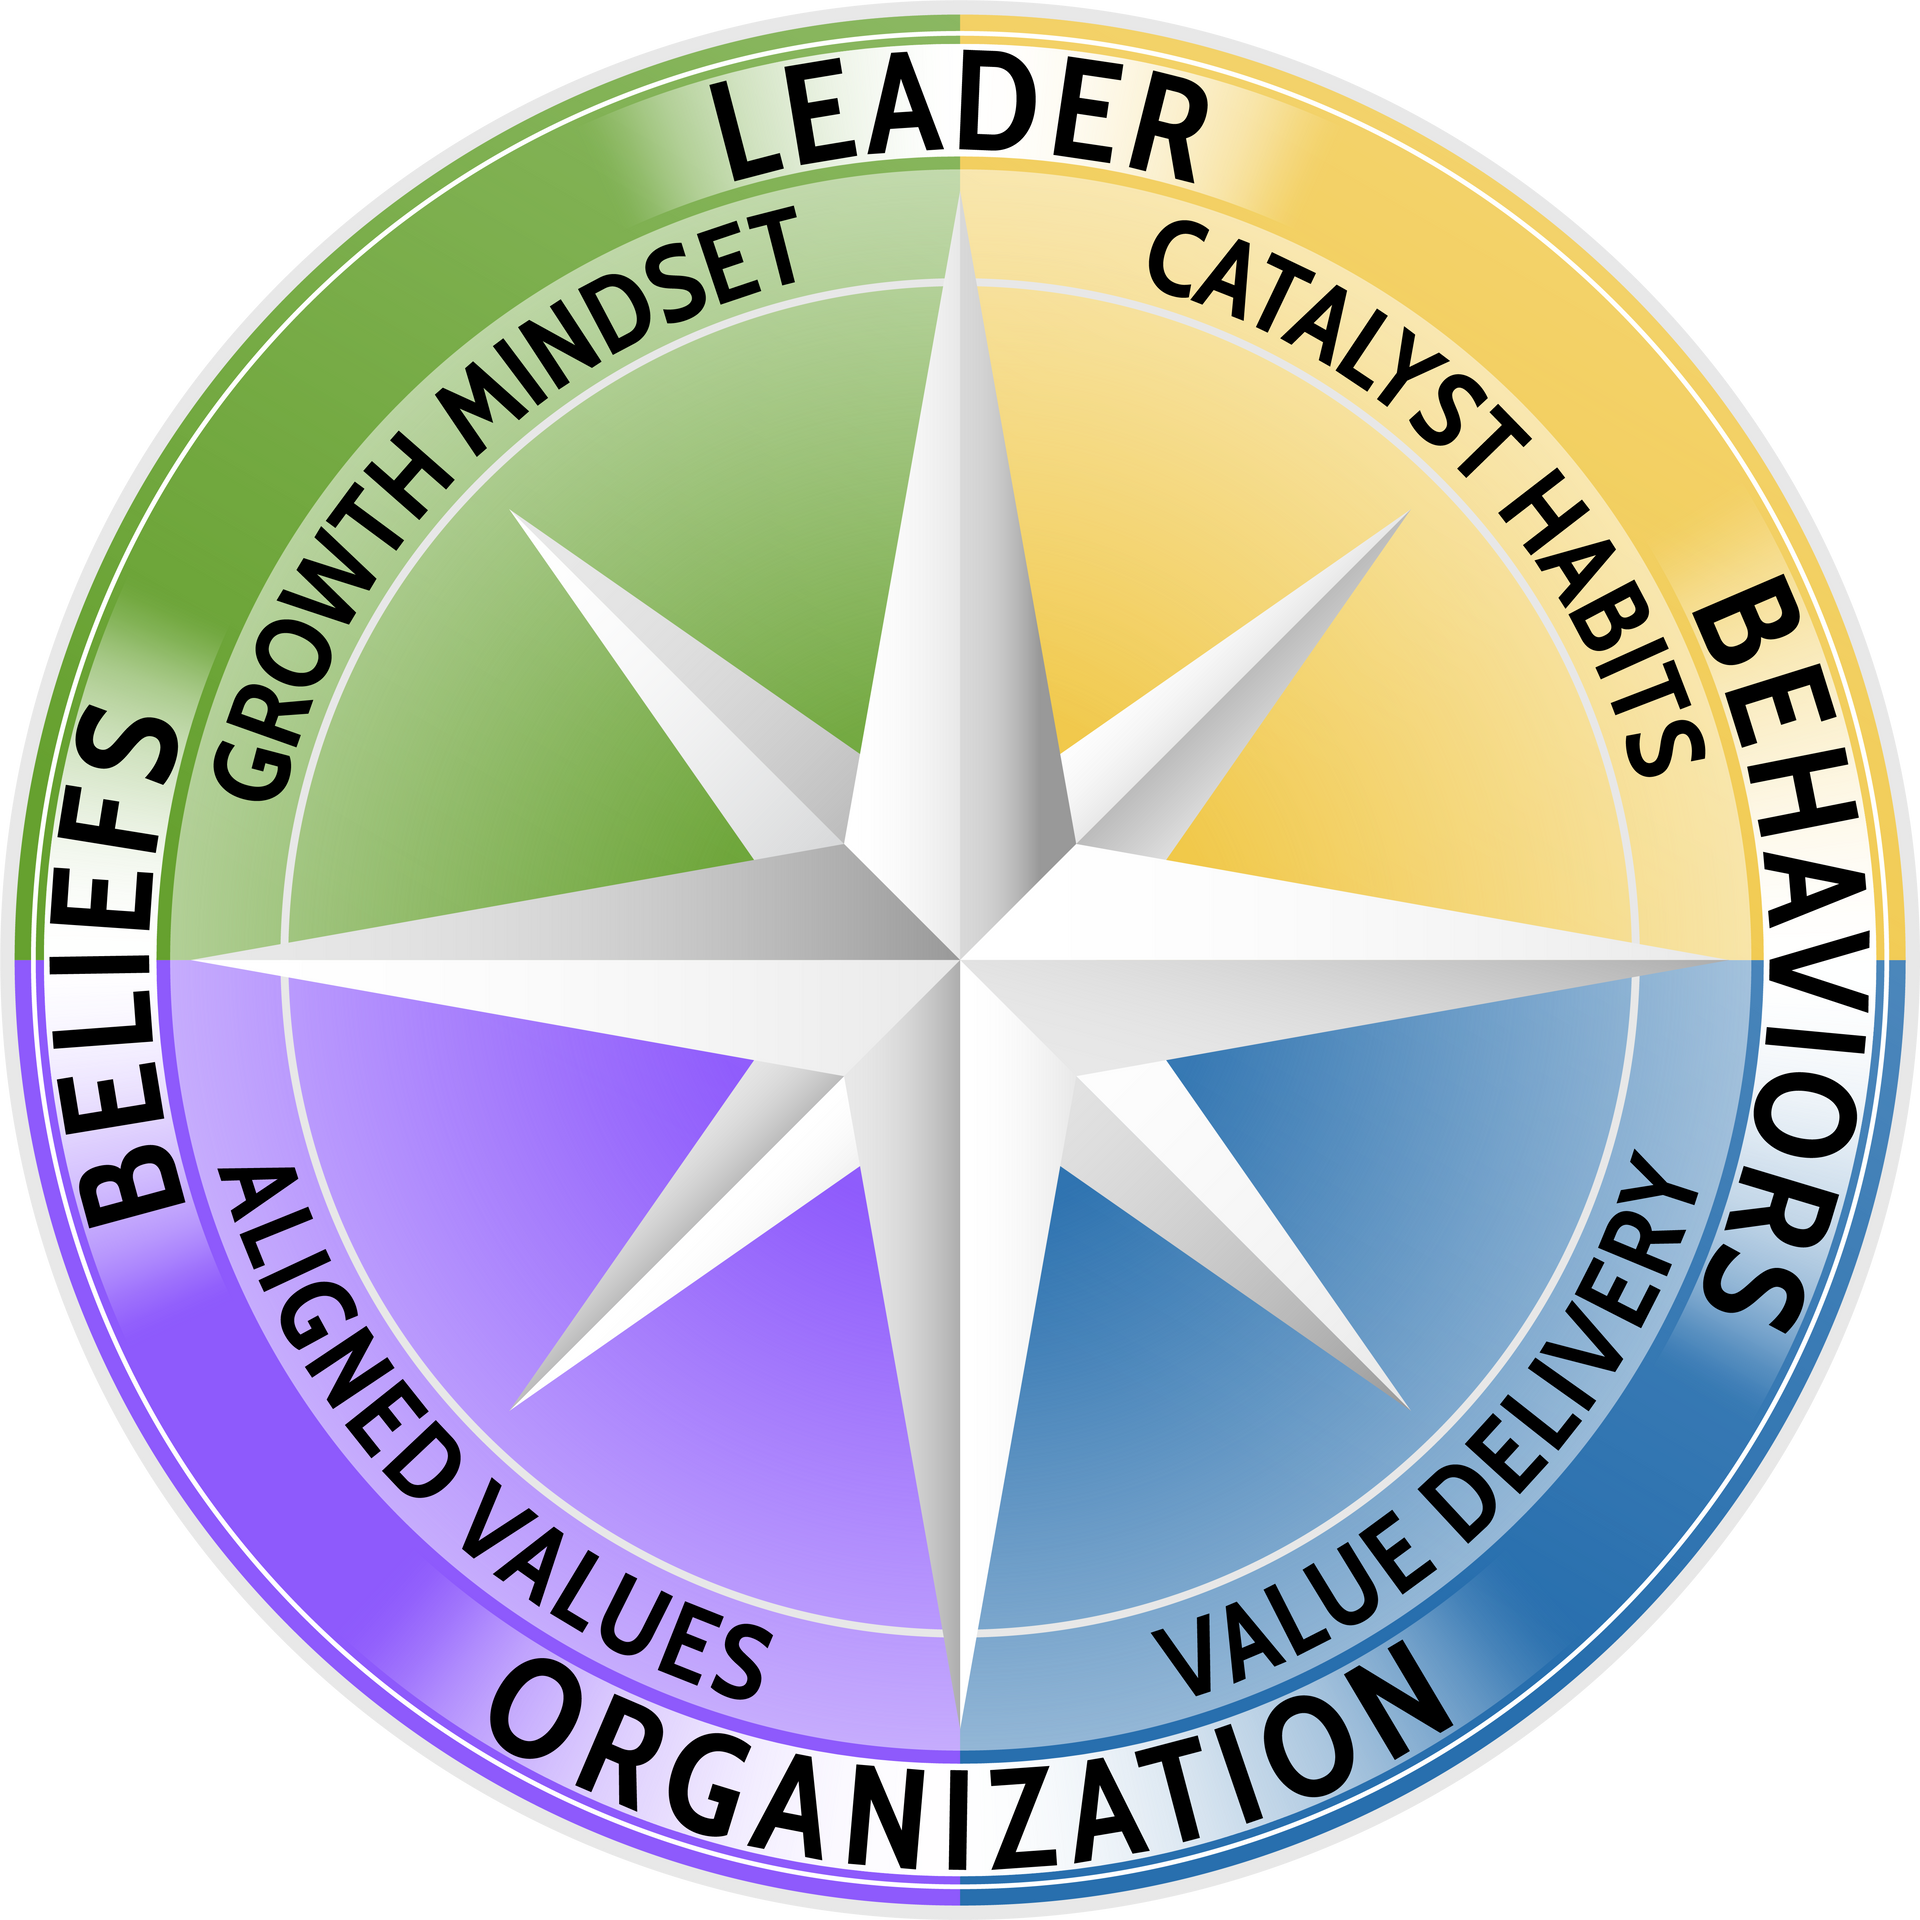 the leadership journey compass with the words leader to the north, organization to the south, beliefs to the west and behaviors to the east. the interior labels on the compass are clockwise: catalyst habits, value delivery, aligned values, and growth mindset